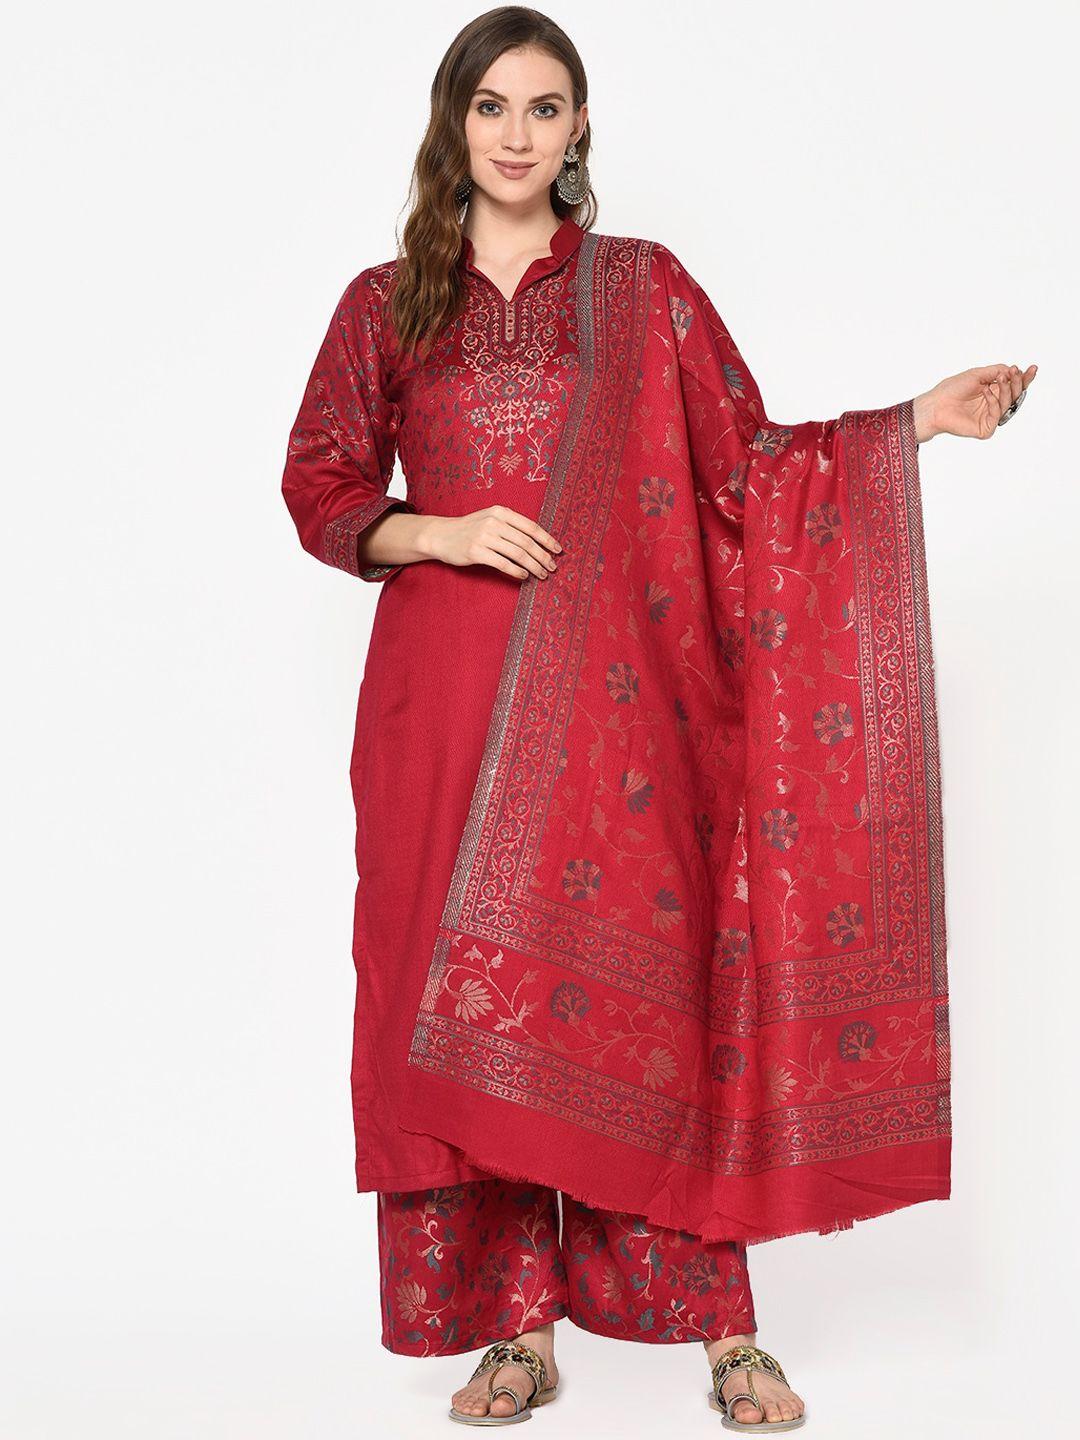 safaa-women-marron-viscose-acrylic-woven-design-suit-unstitched-dress-material-for-winter